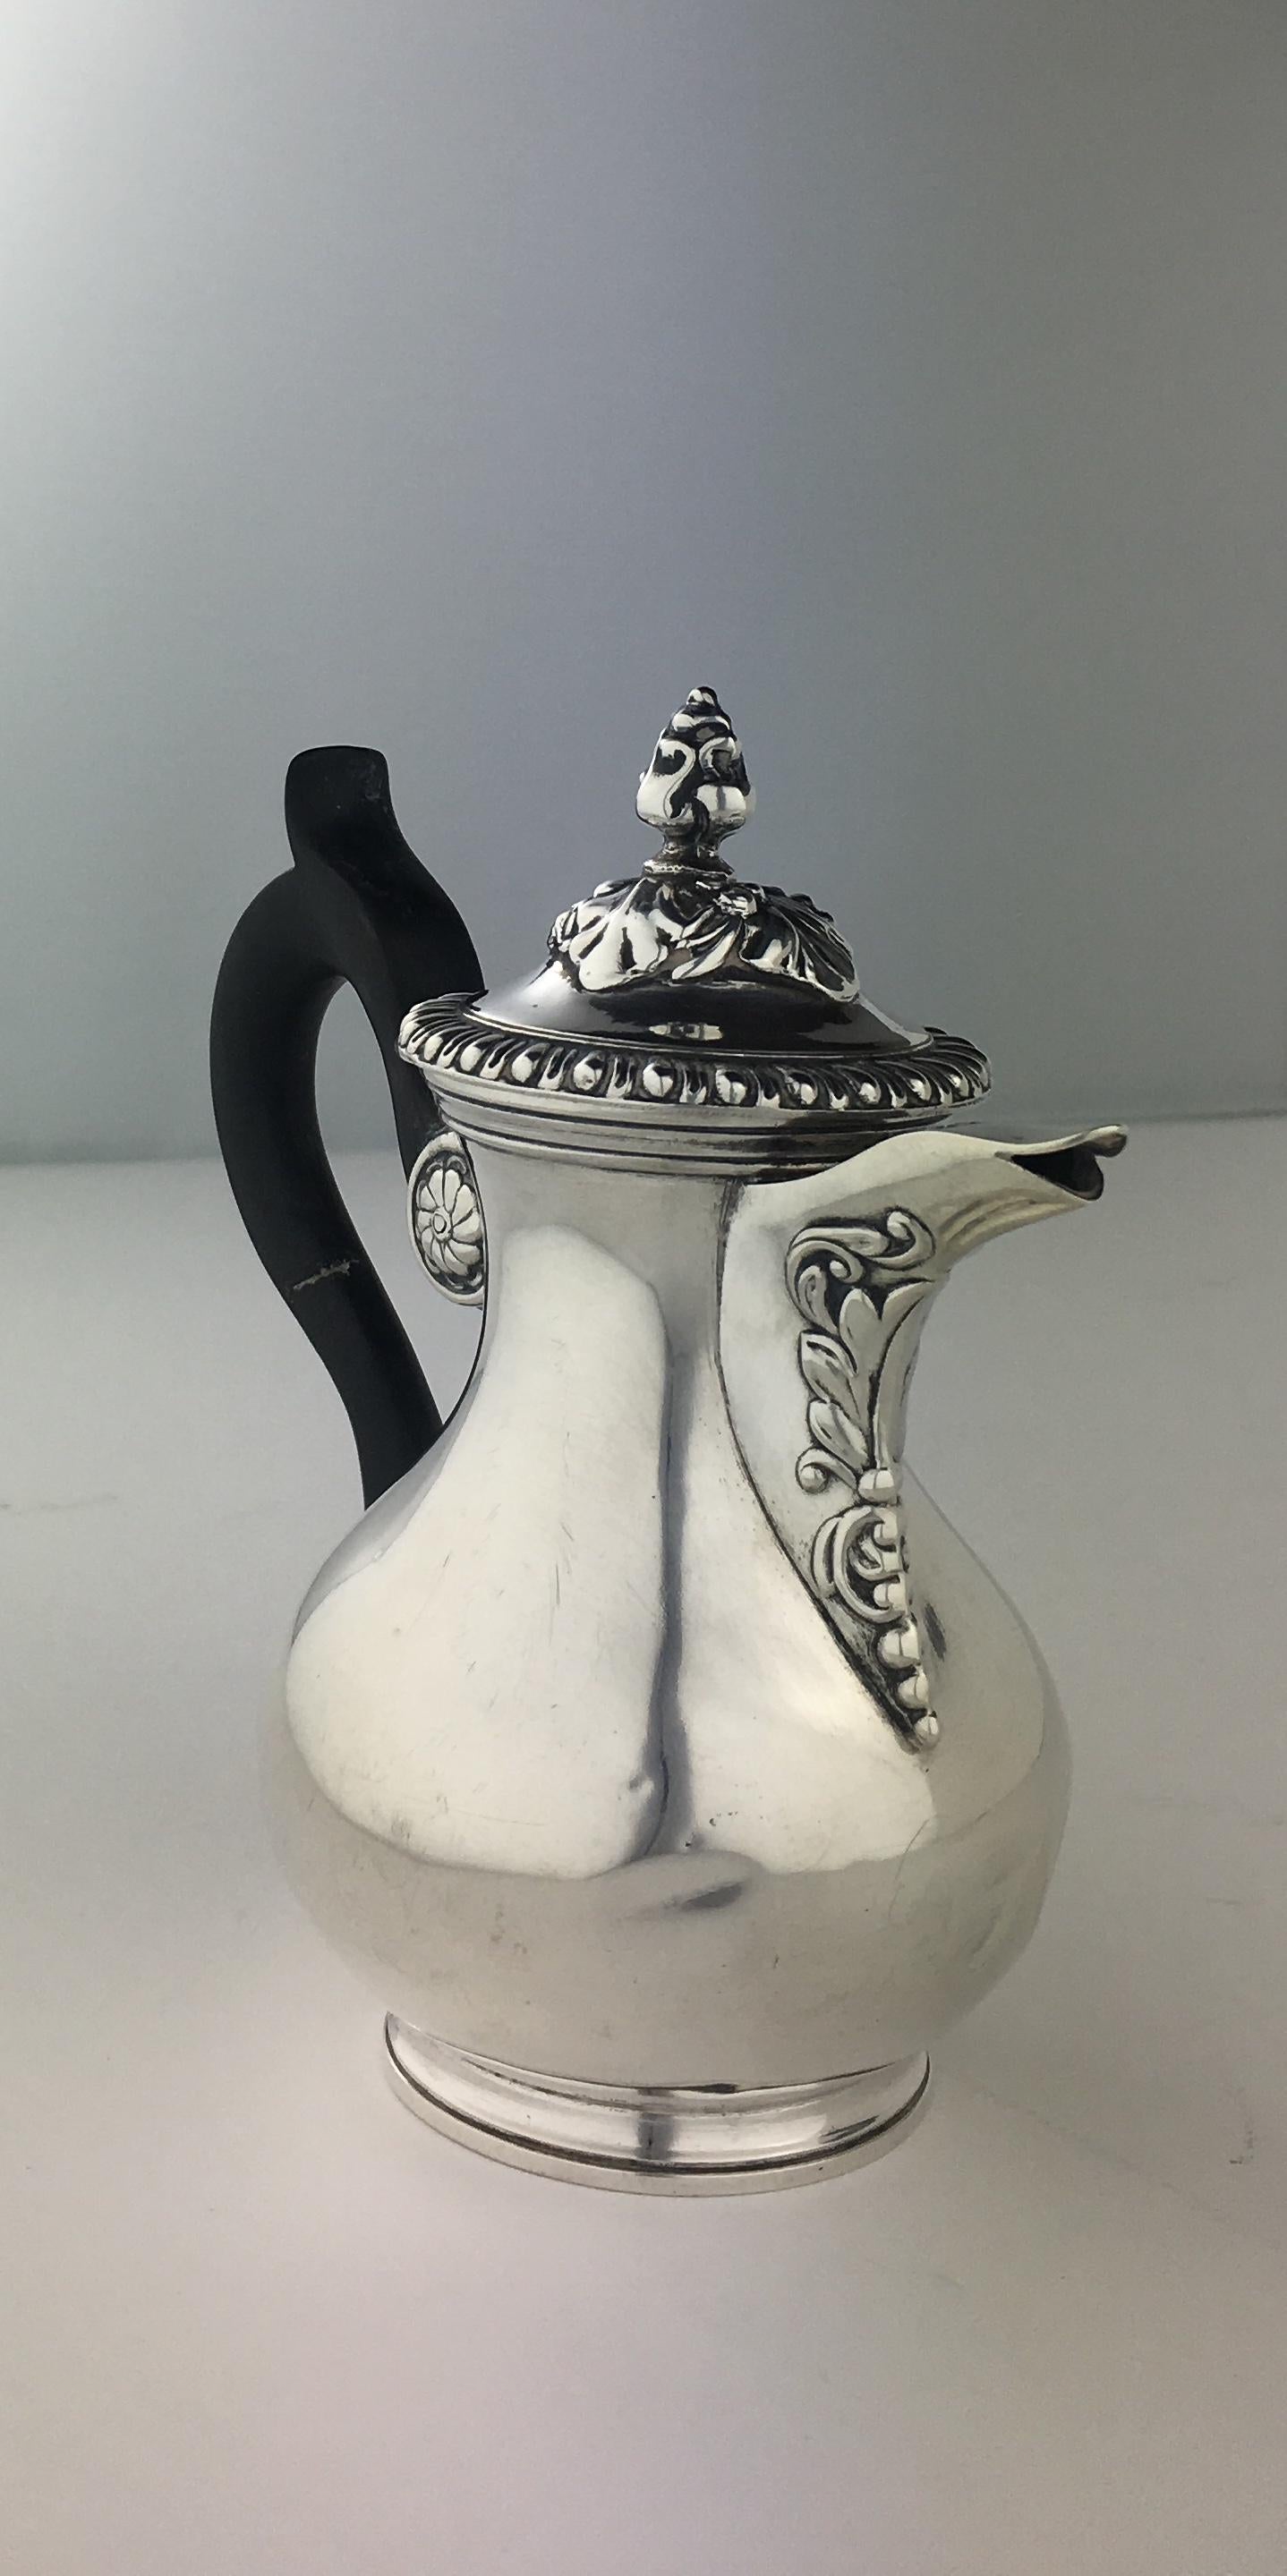 Hand-Carved French Sterling Silver Coffee or Tea Pot, circa 1860 Stamped Martial Fray, Paris